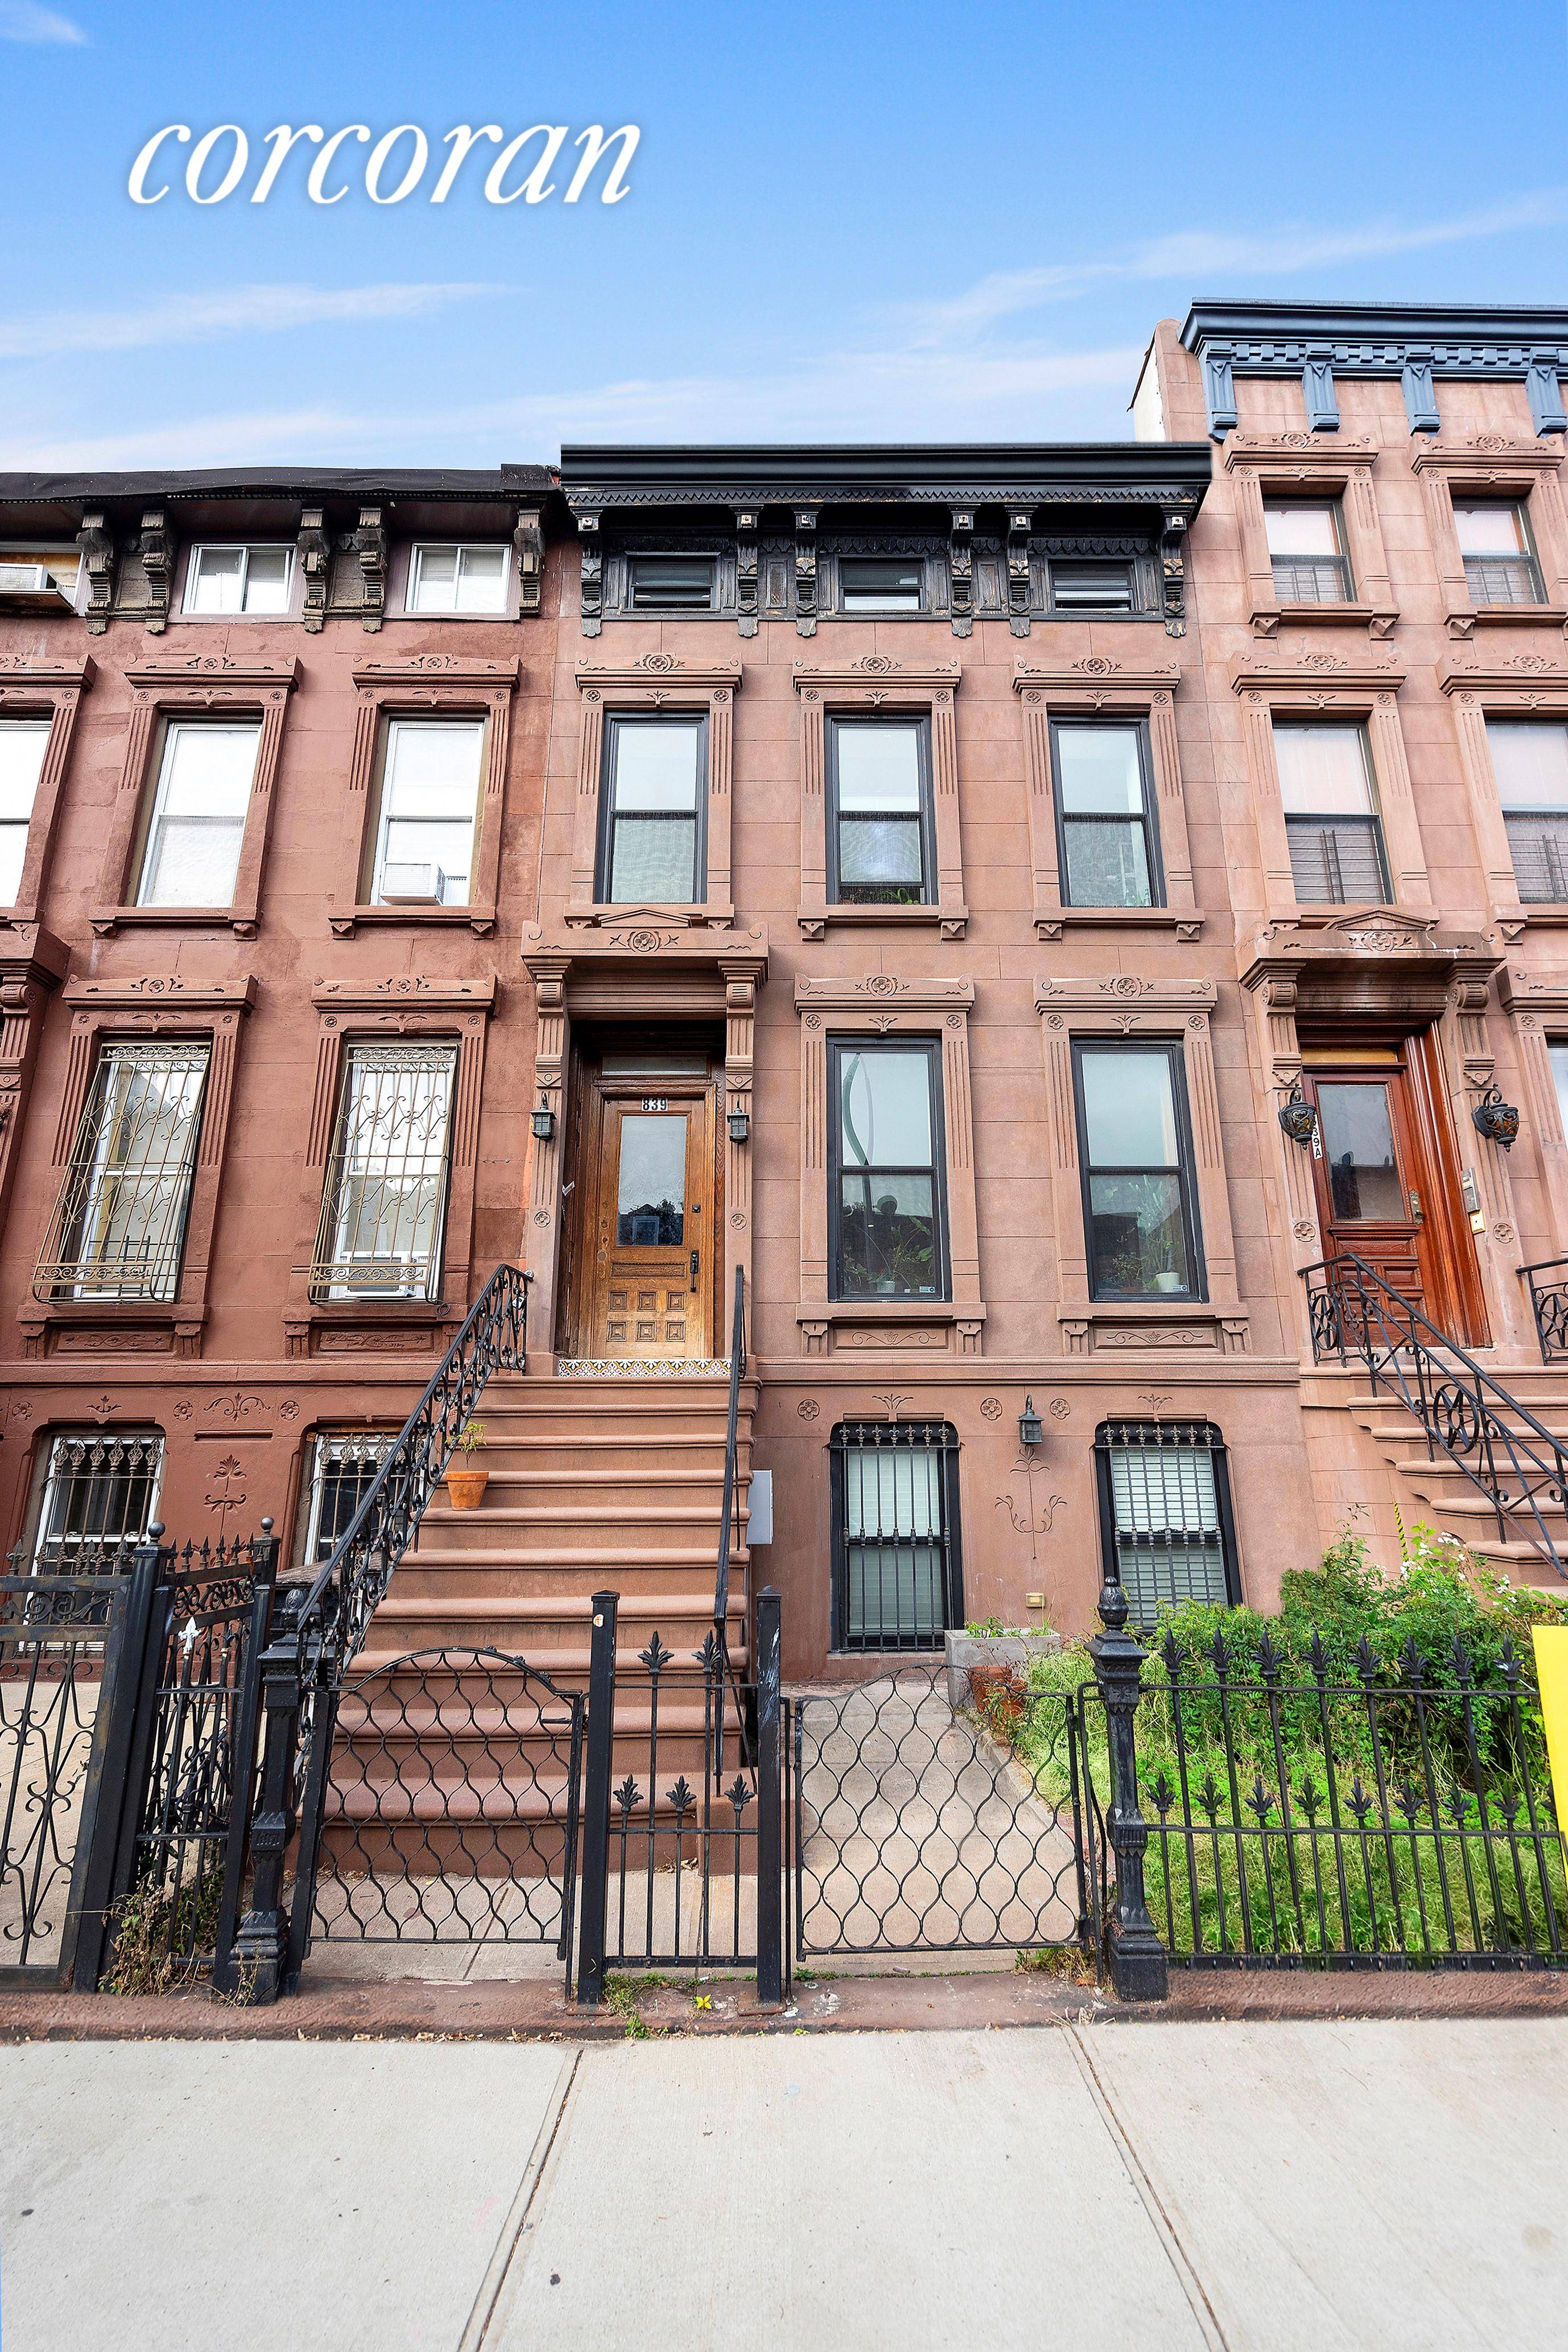 Earn income while living in your own gut renovated and restored 20' wide 3 Family historic BROWNSTONE in Stuyvesant Heights BED STUY, Brooklyn including a 2700 SF 3BR, 3.